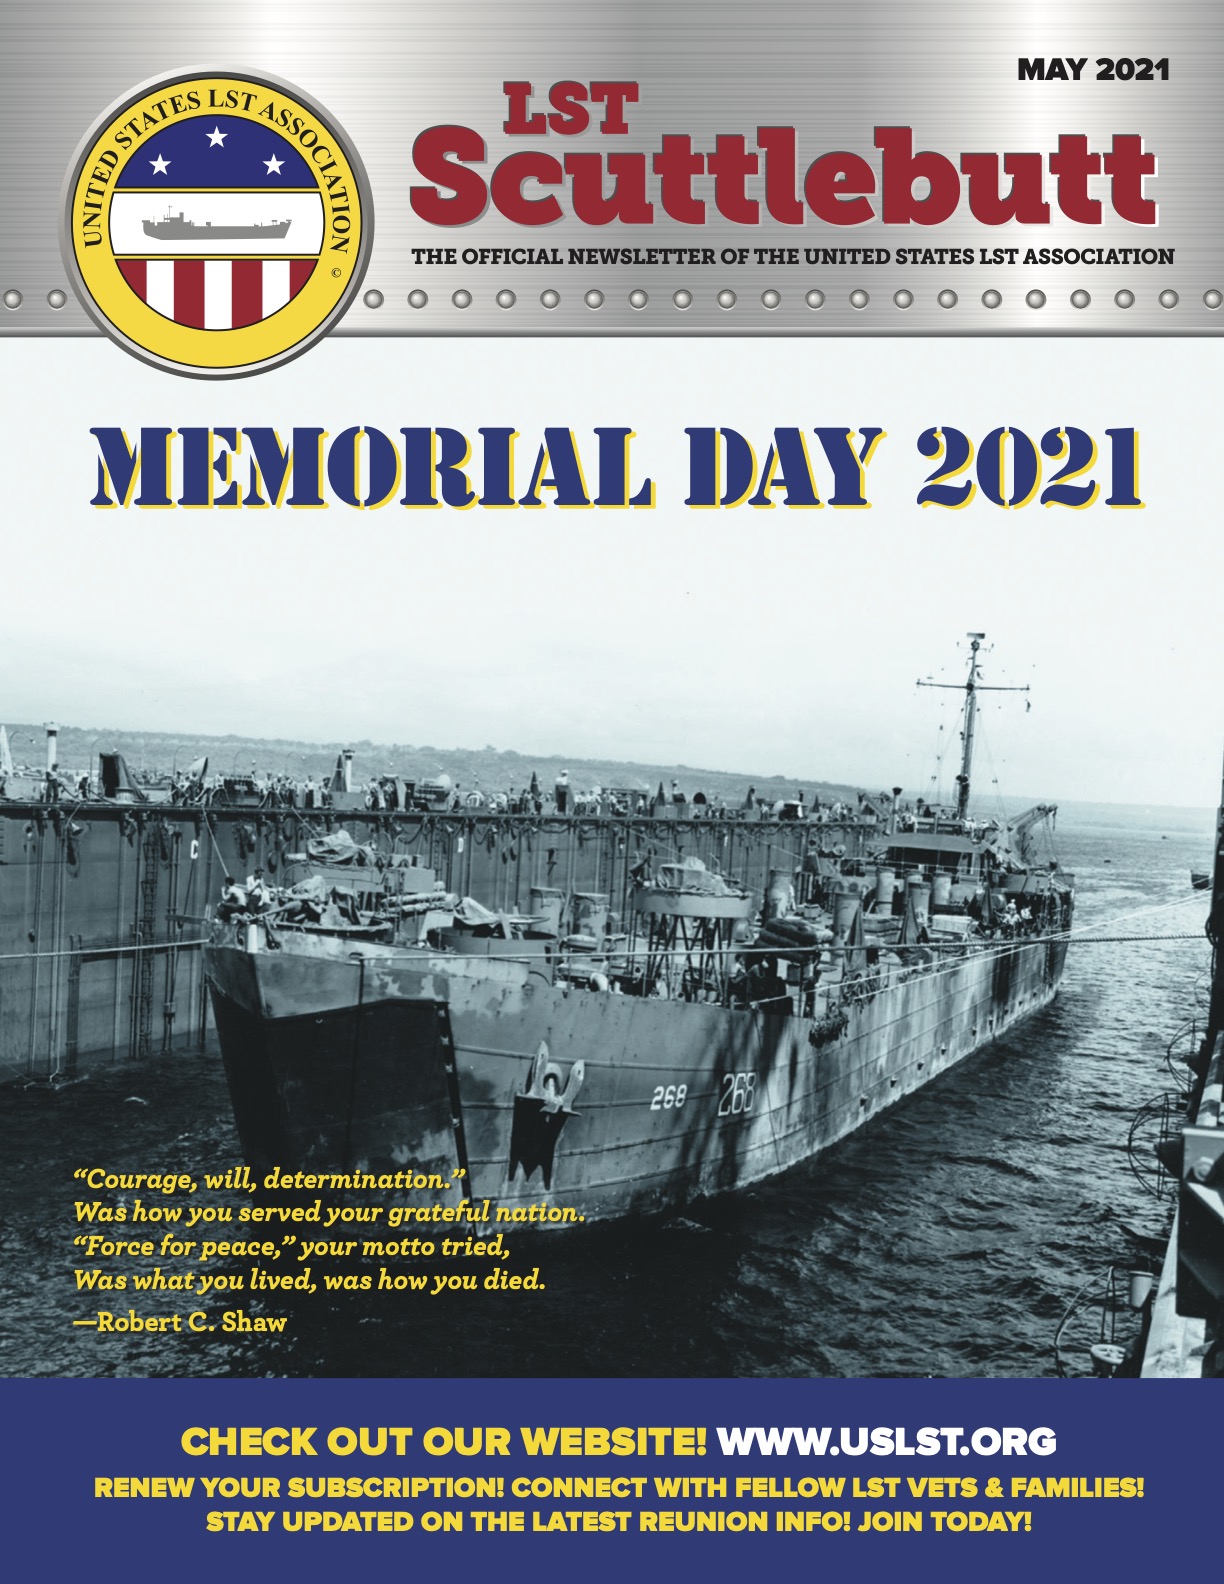 Scuttlebutt Issue 27 May 2021 COVER